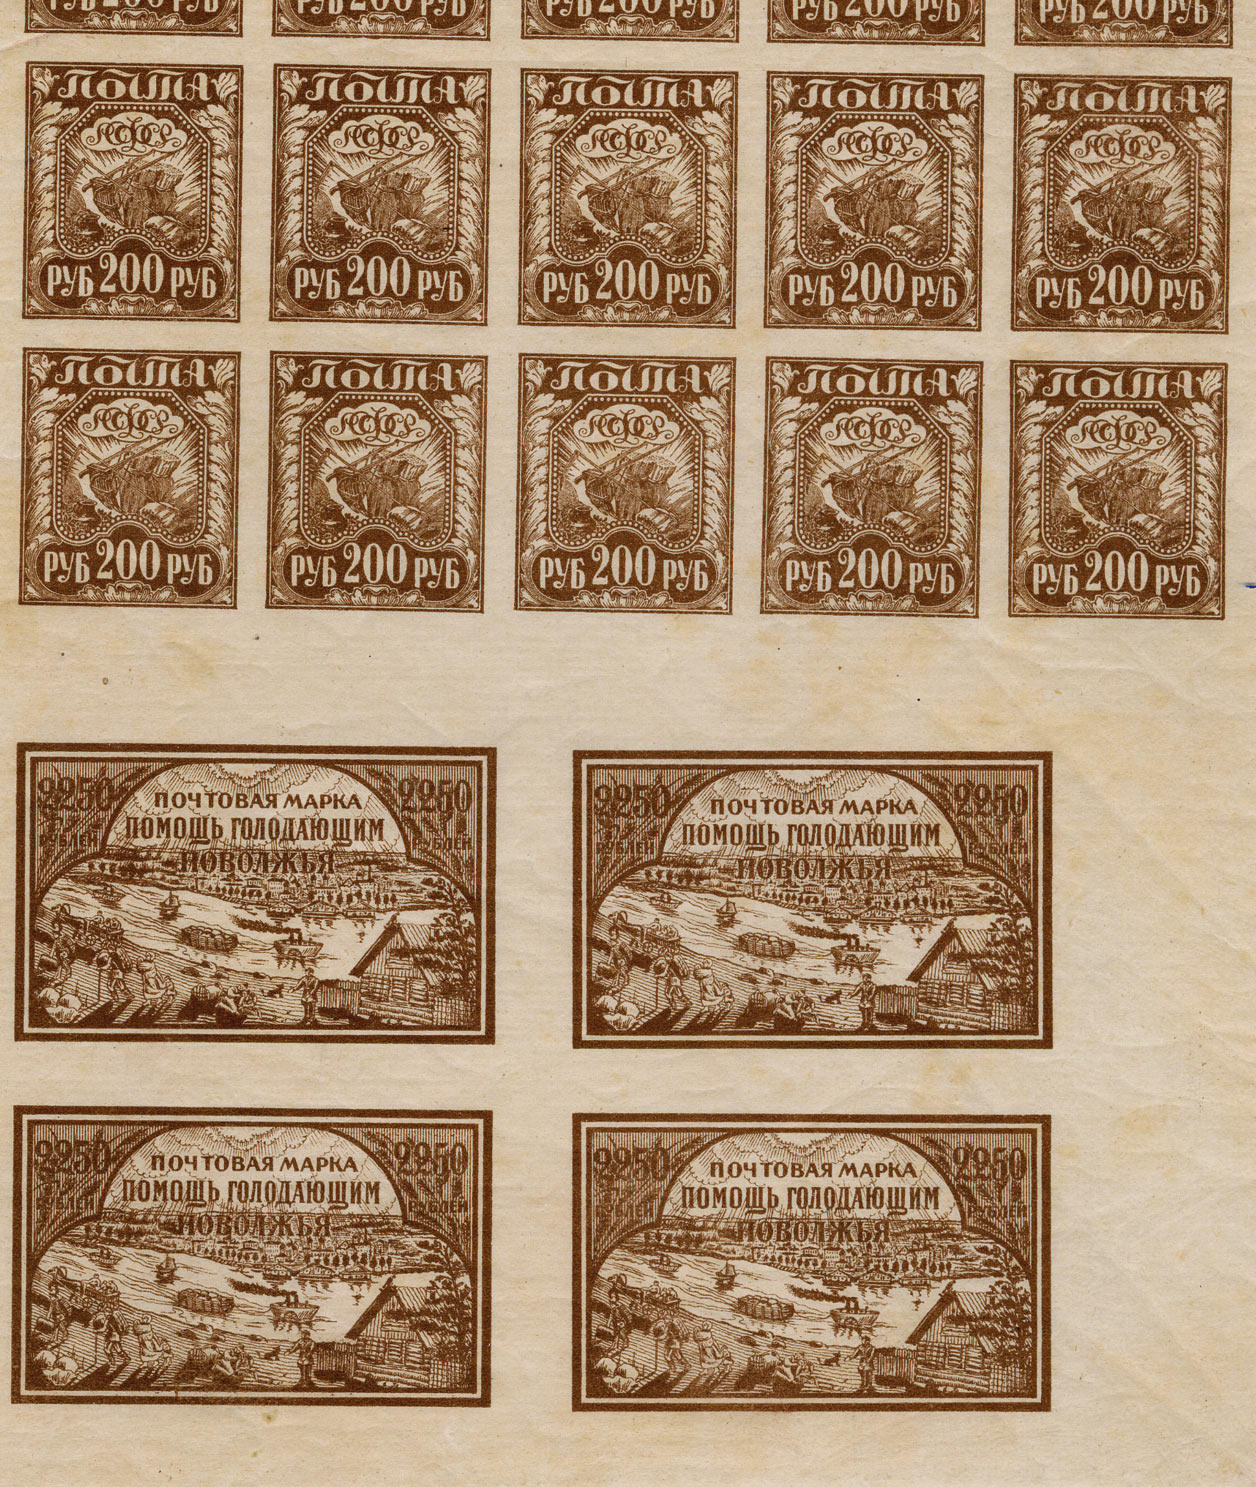 The stamps printed together with a definitive issue